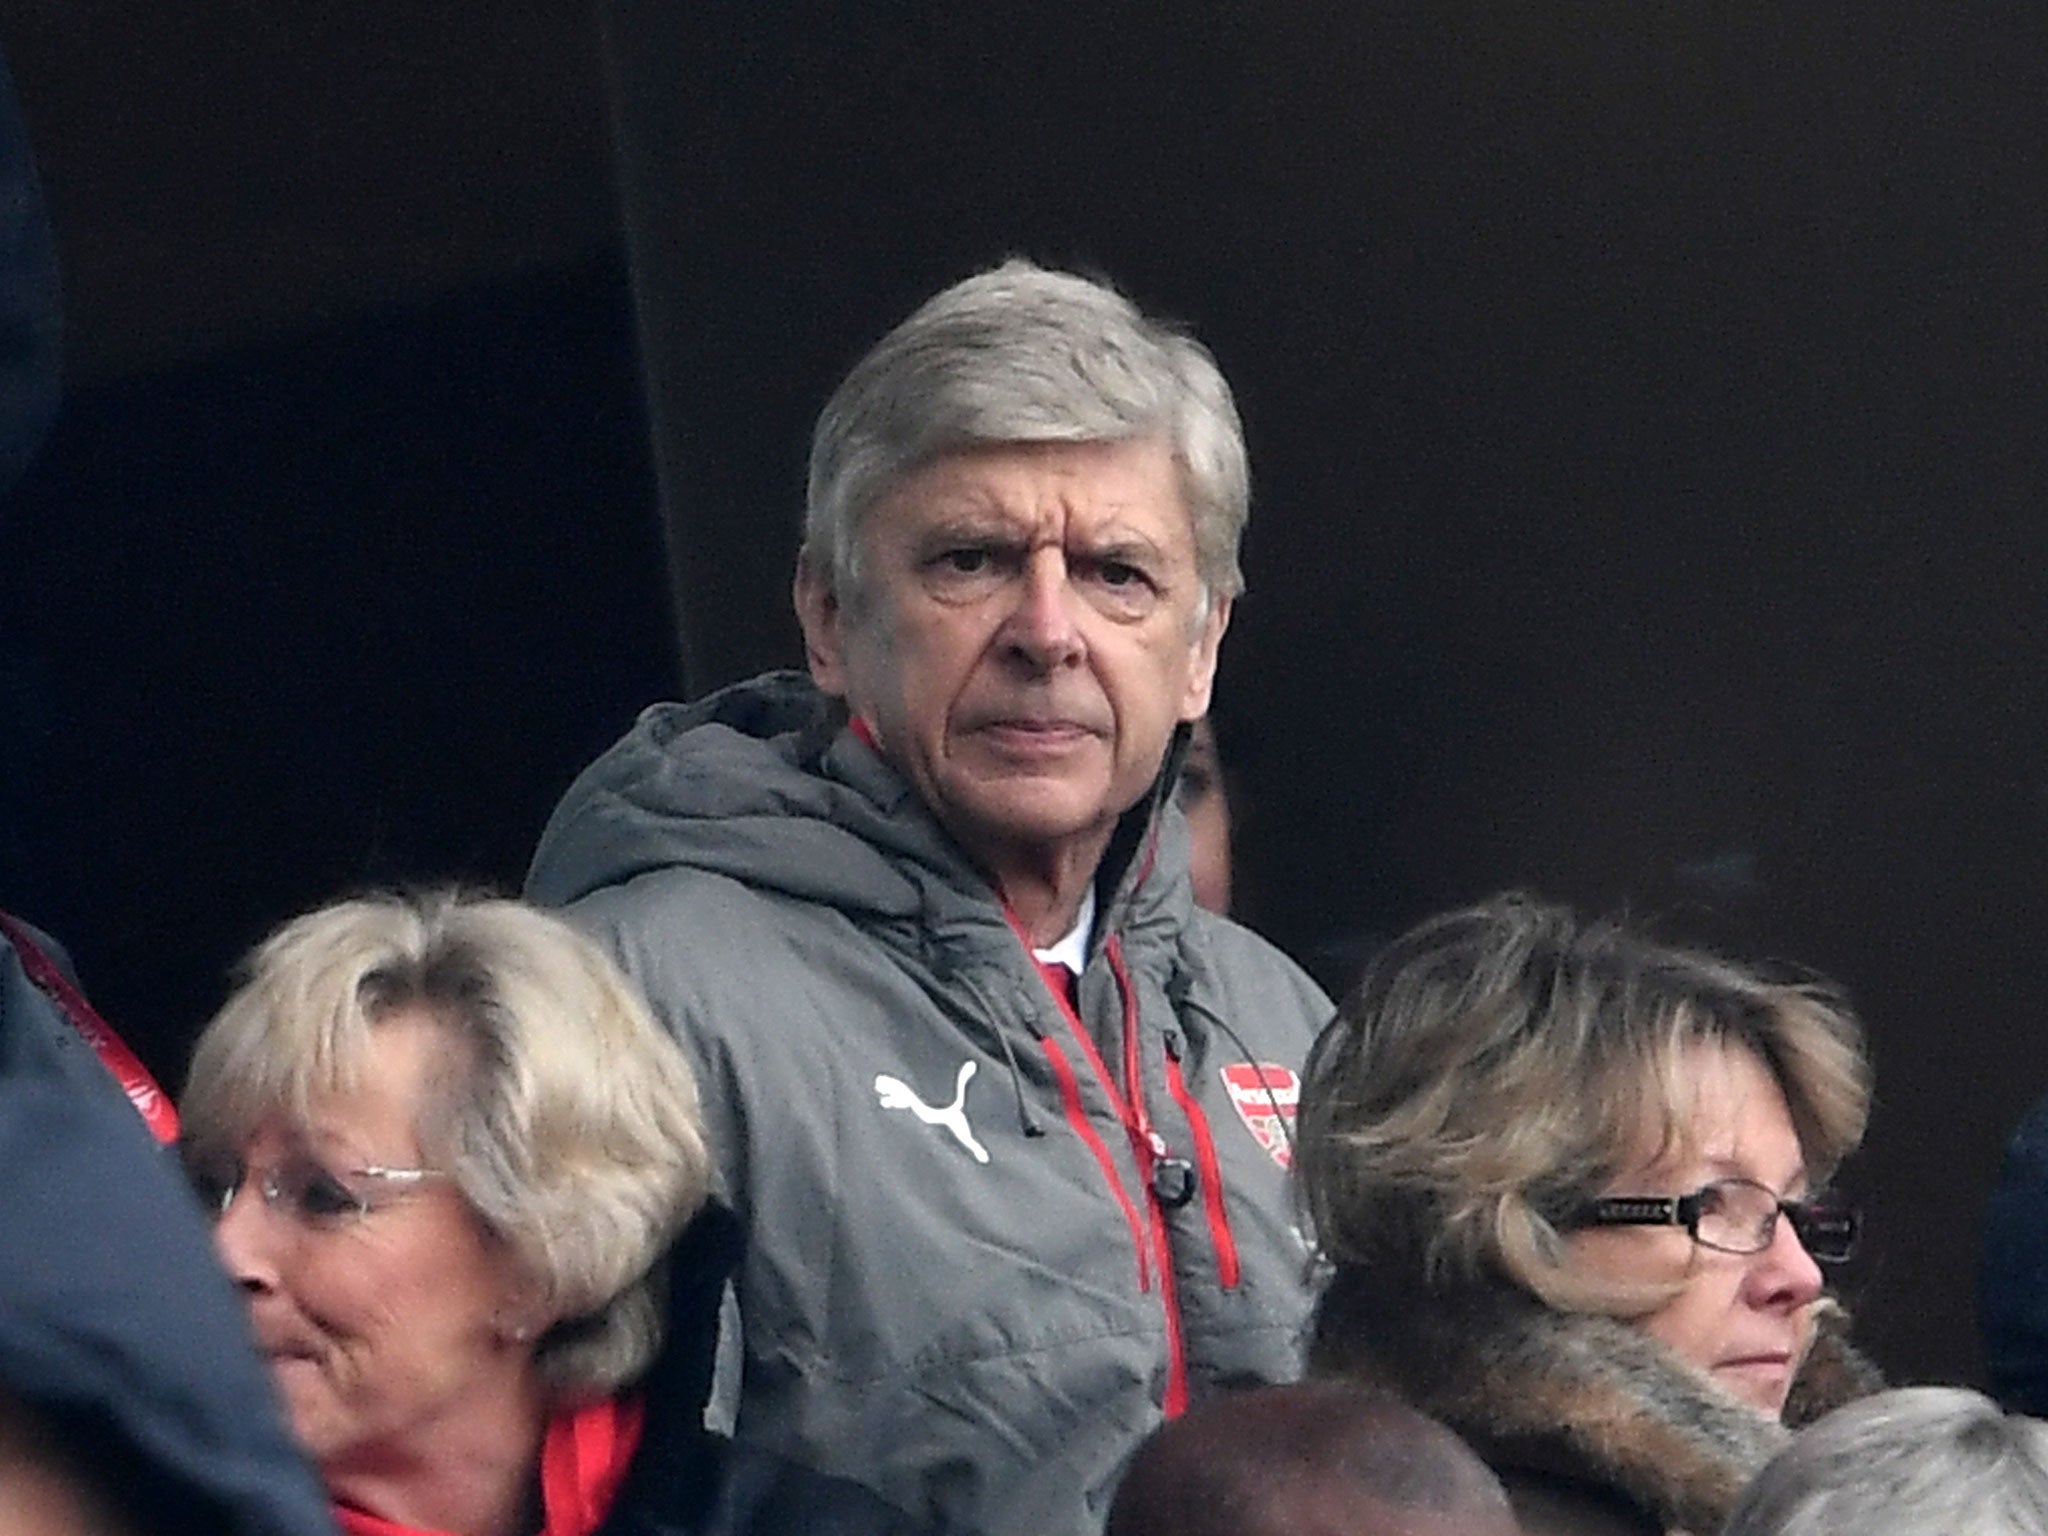 Wenger's replacement will need to fill the void left by the Frenchman